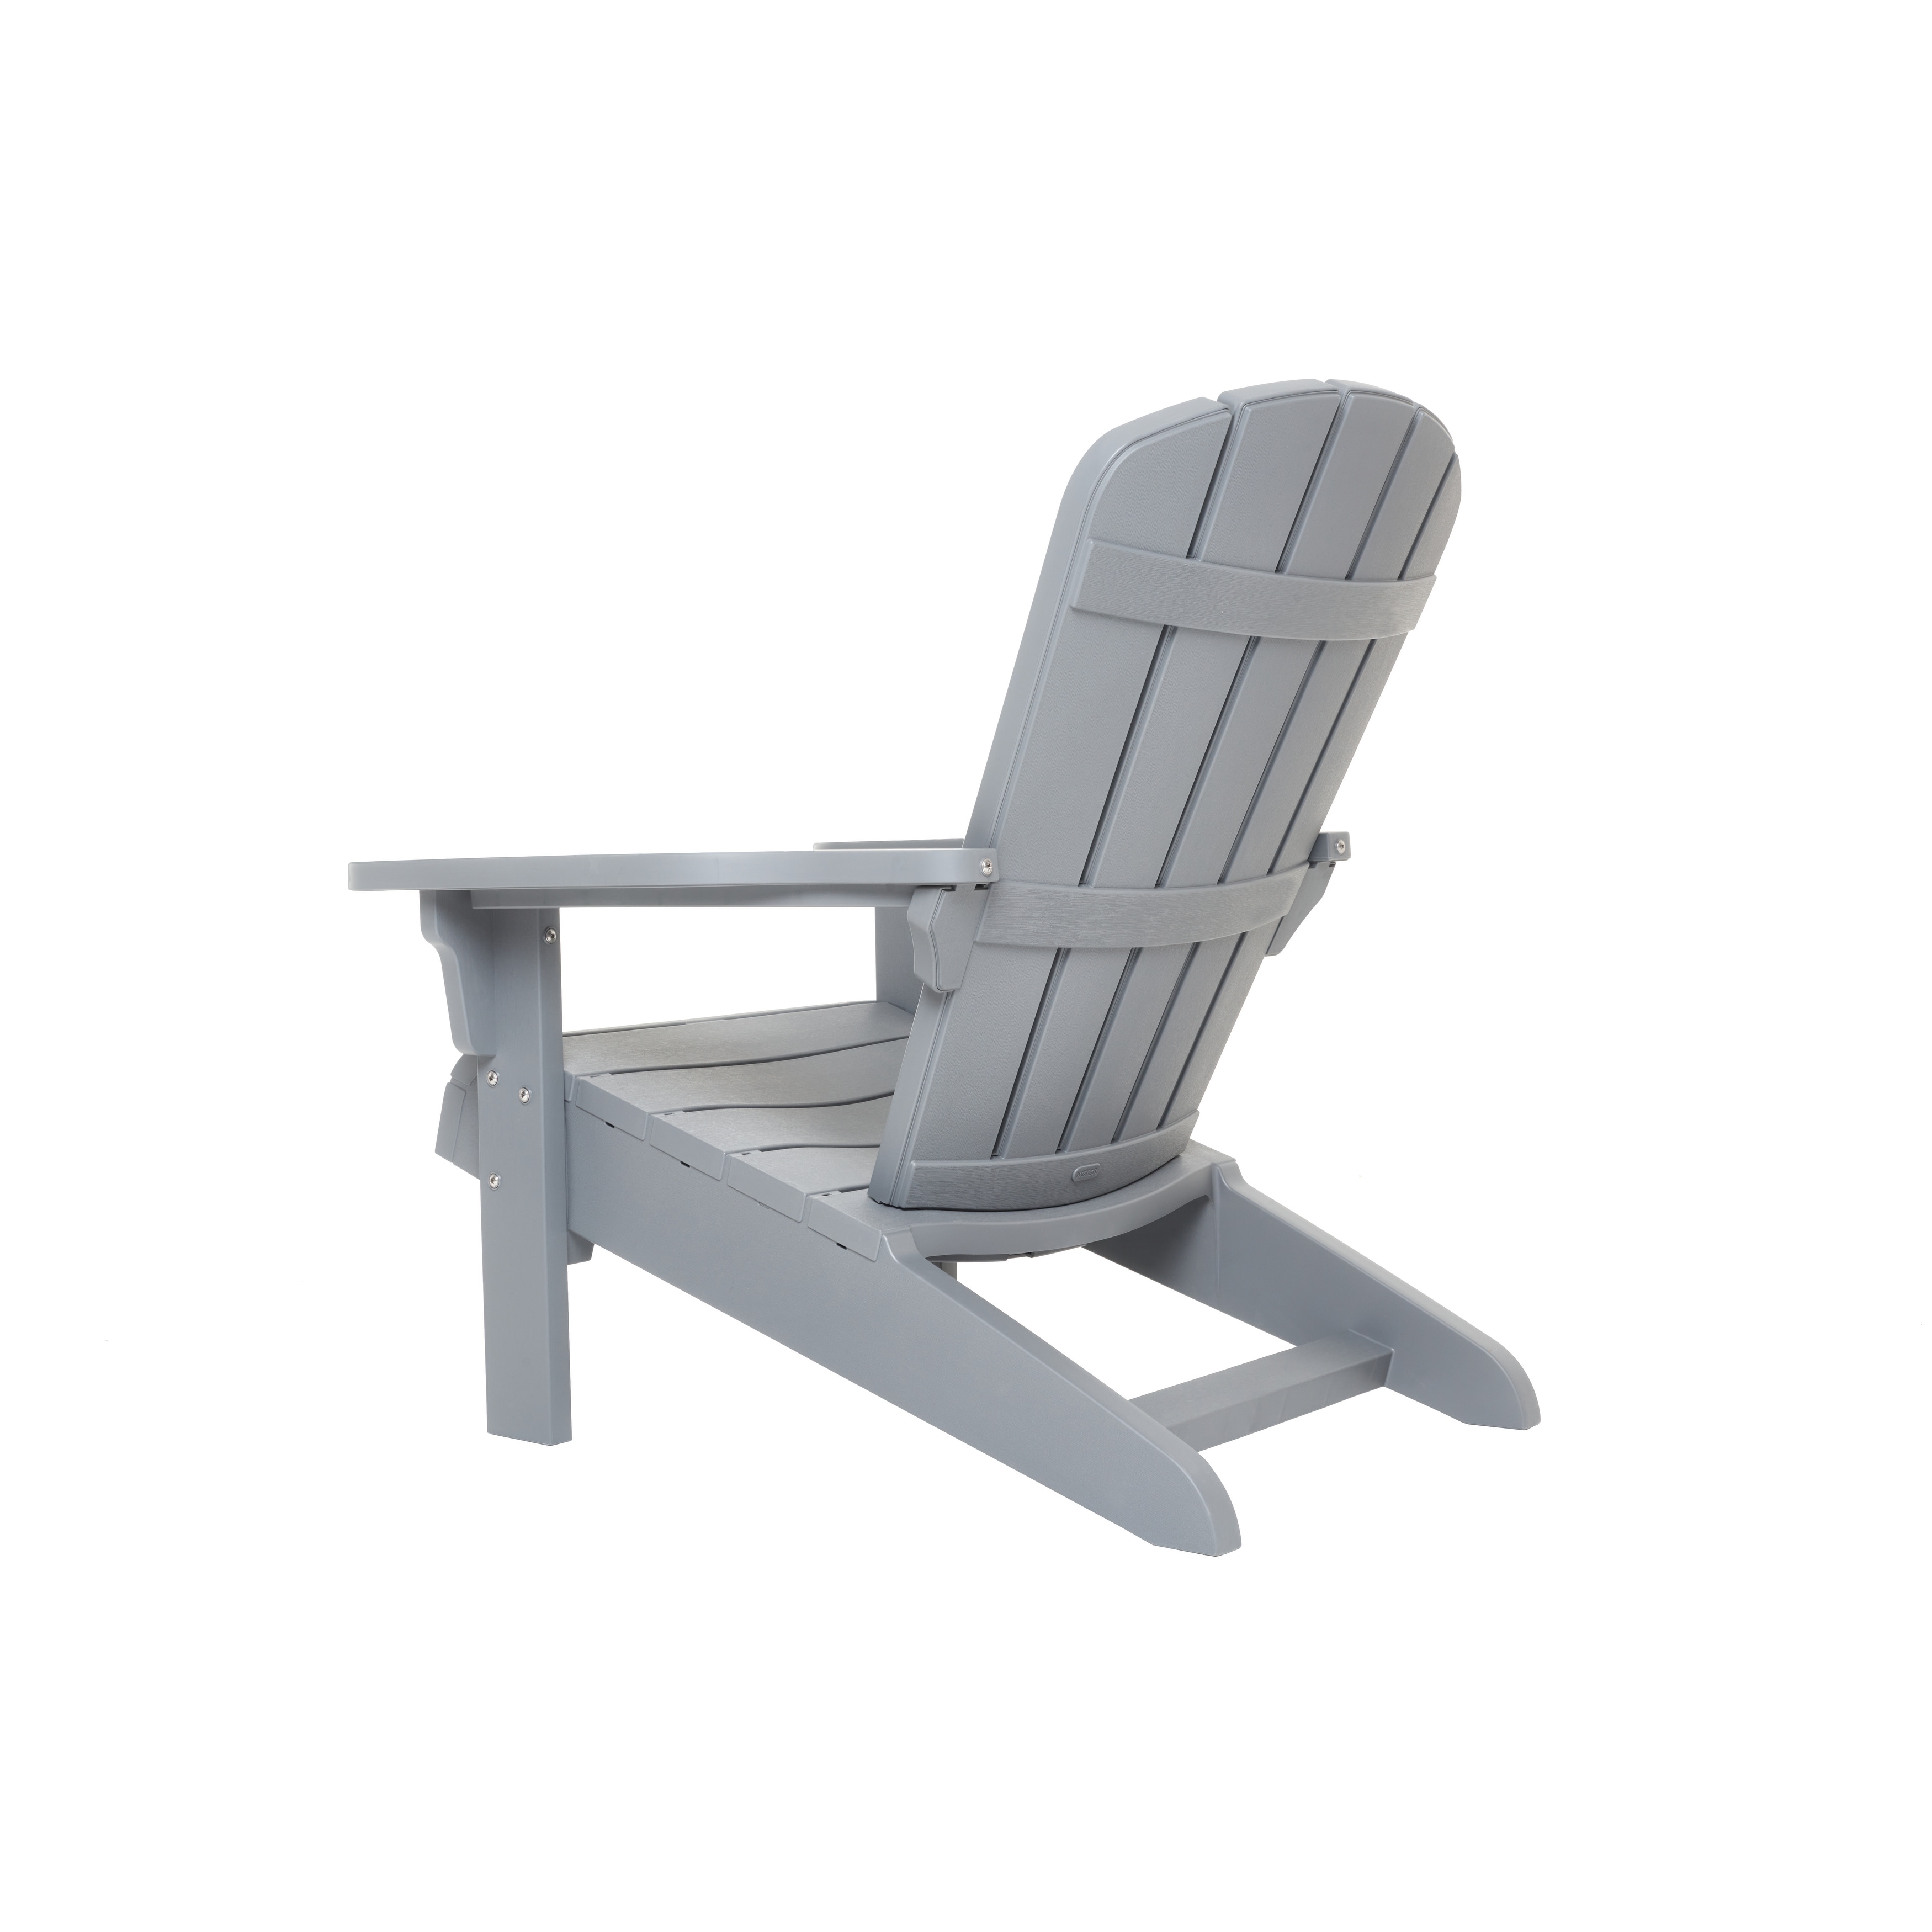 Keter Teton Adirondack Resin Weather Resistant Lounge Furniture Chair - On Sale - Overstock - 36795354